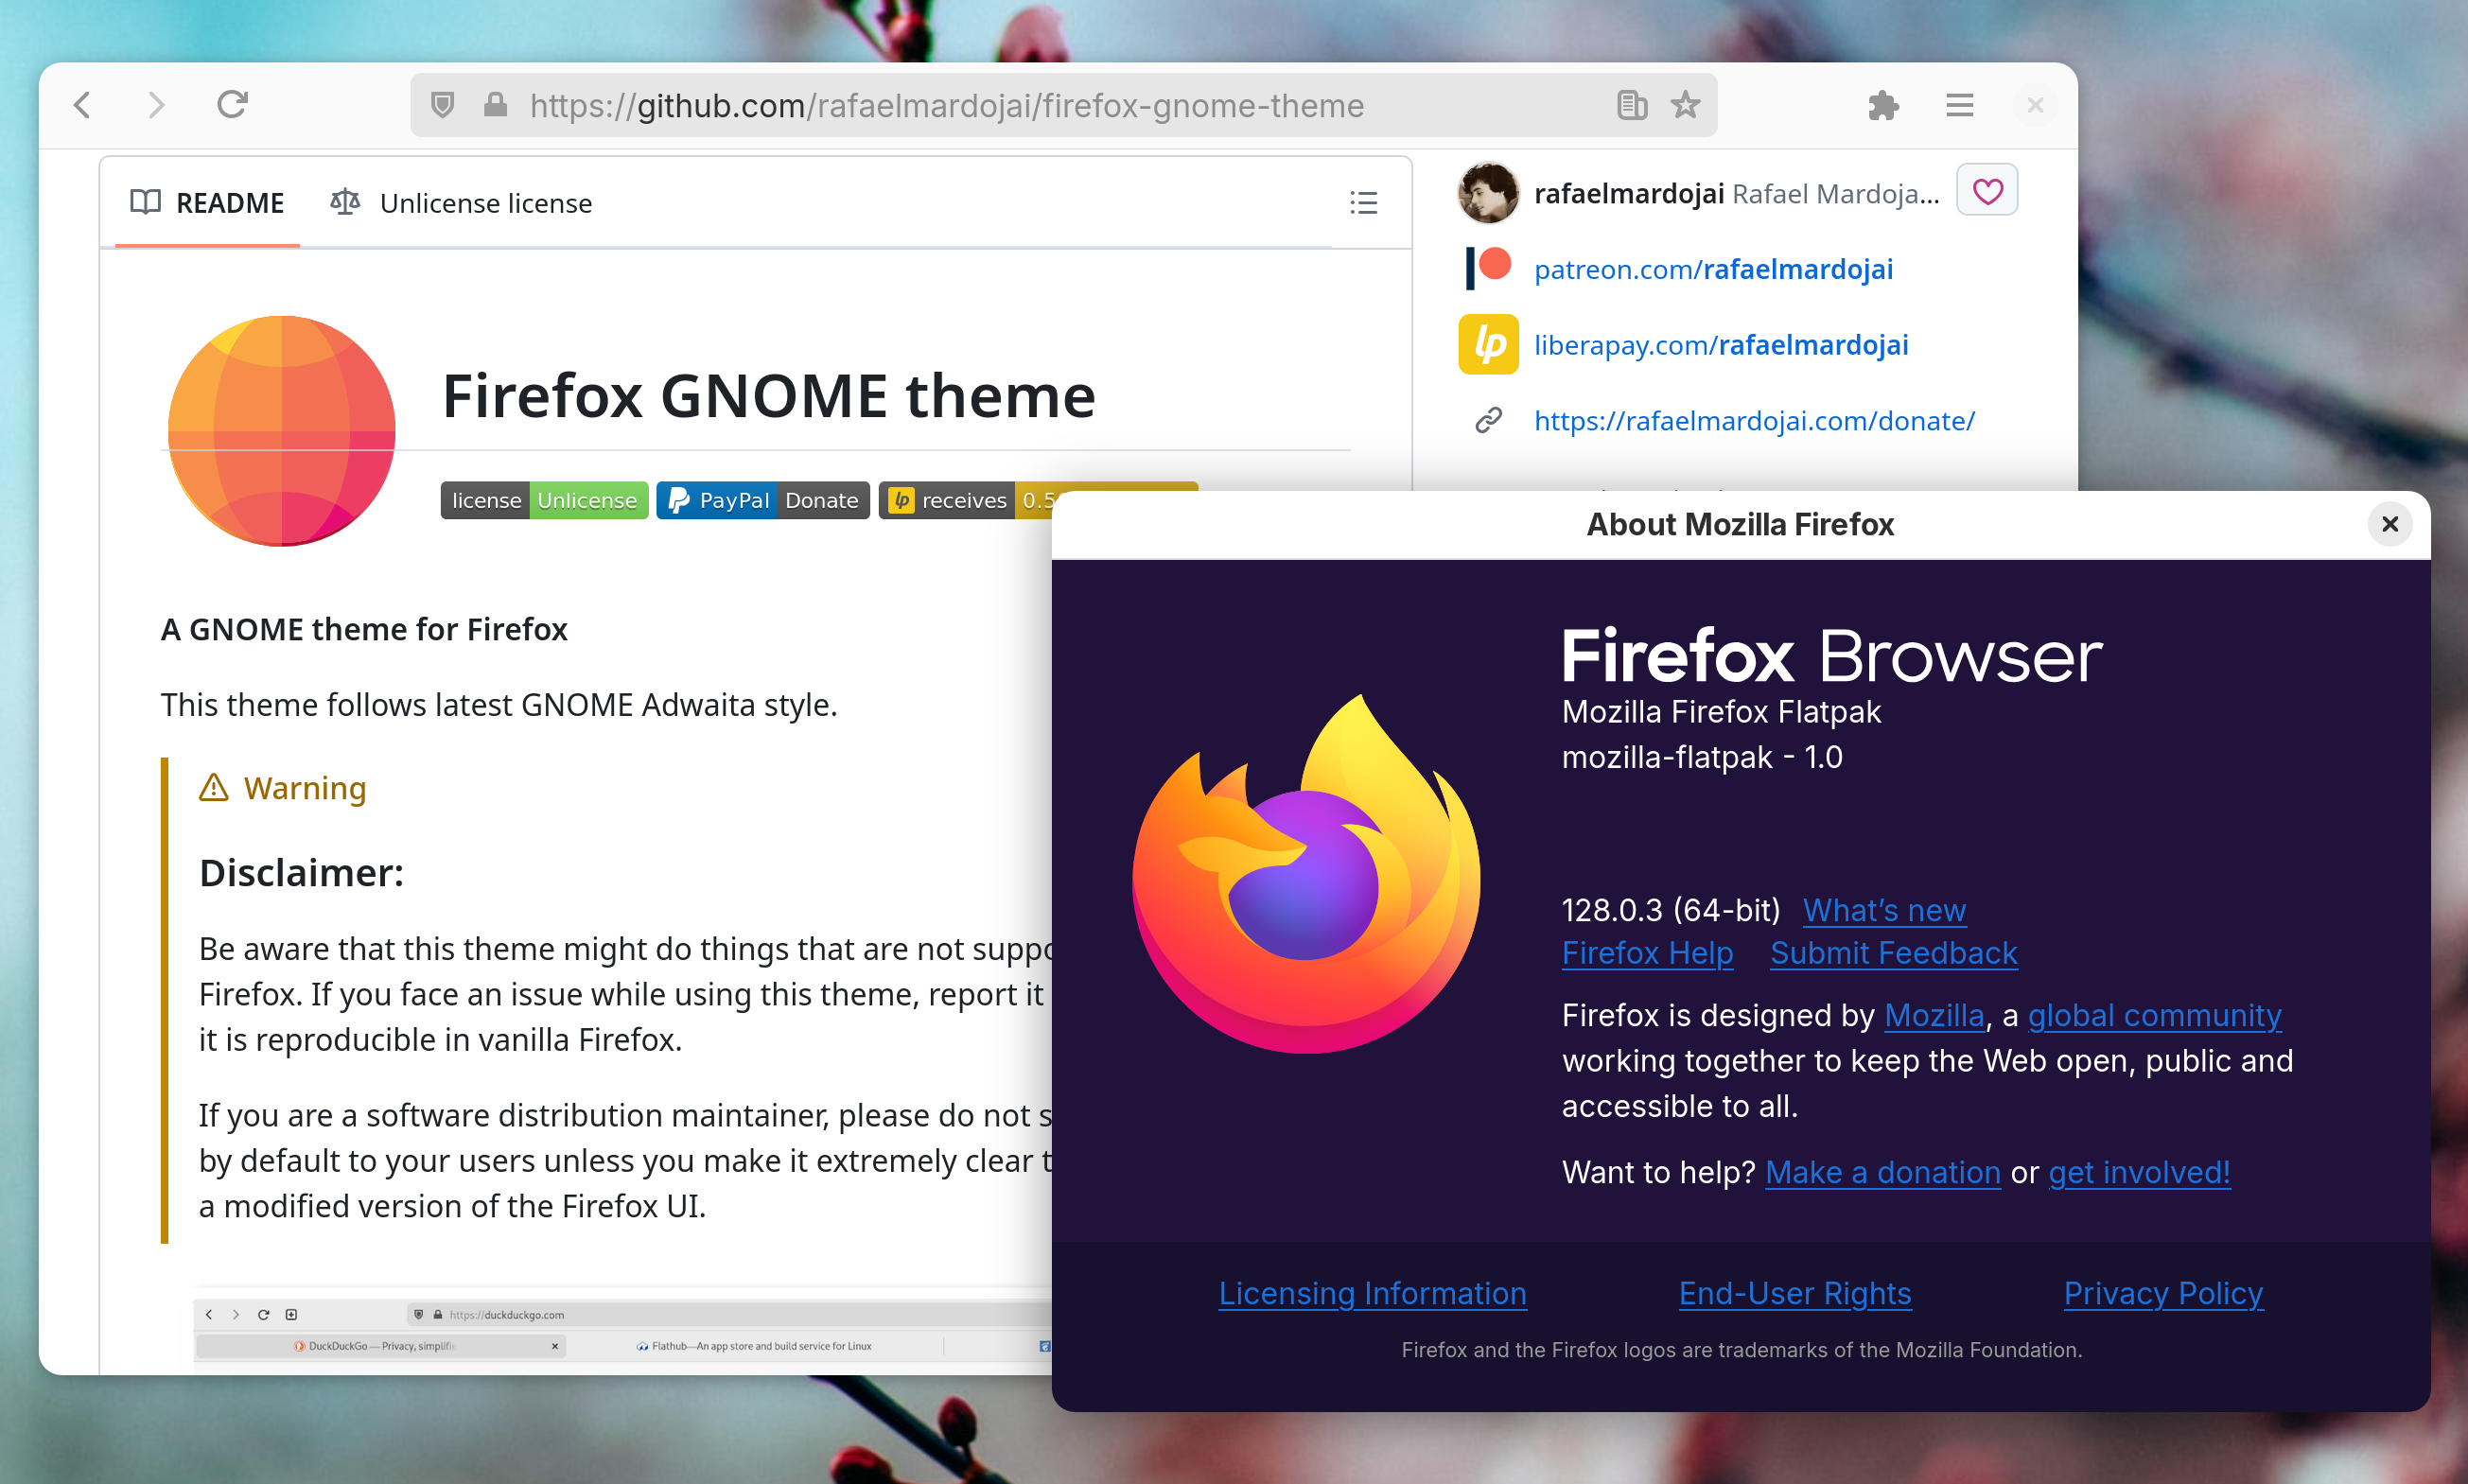 Firefox GNOME theme GitHub page in Firefox on Linux.